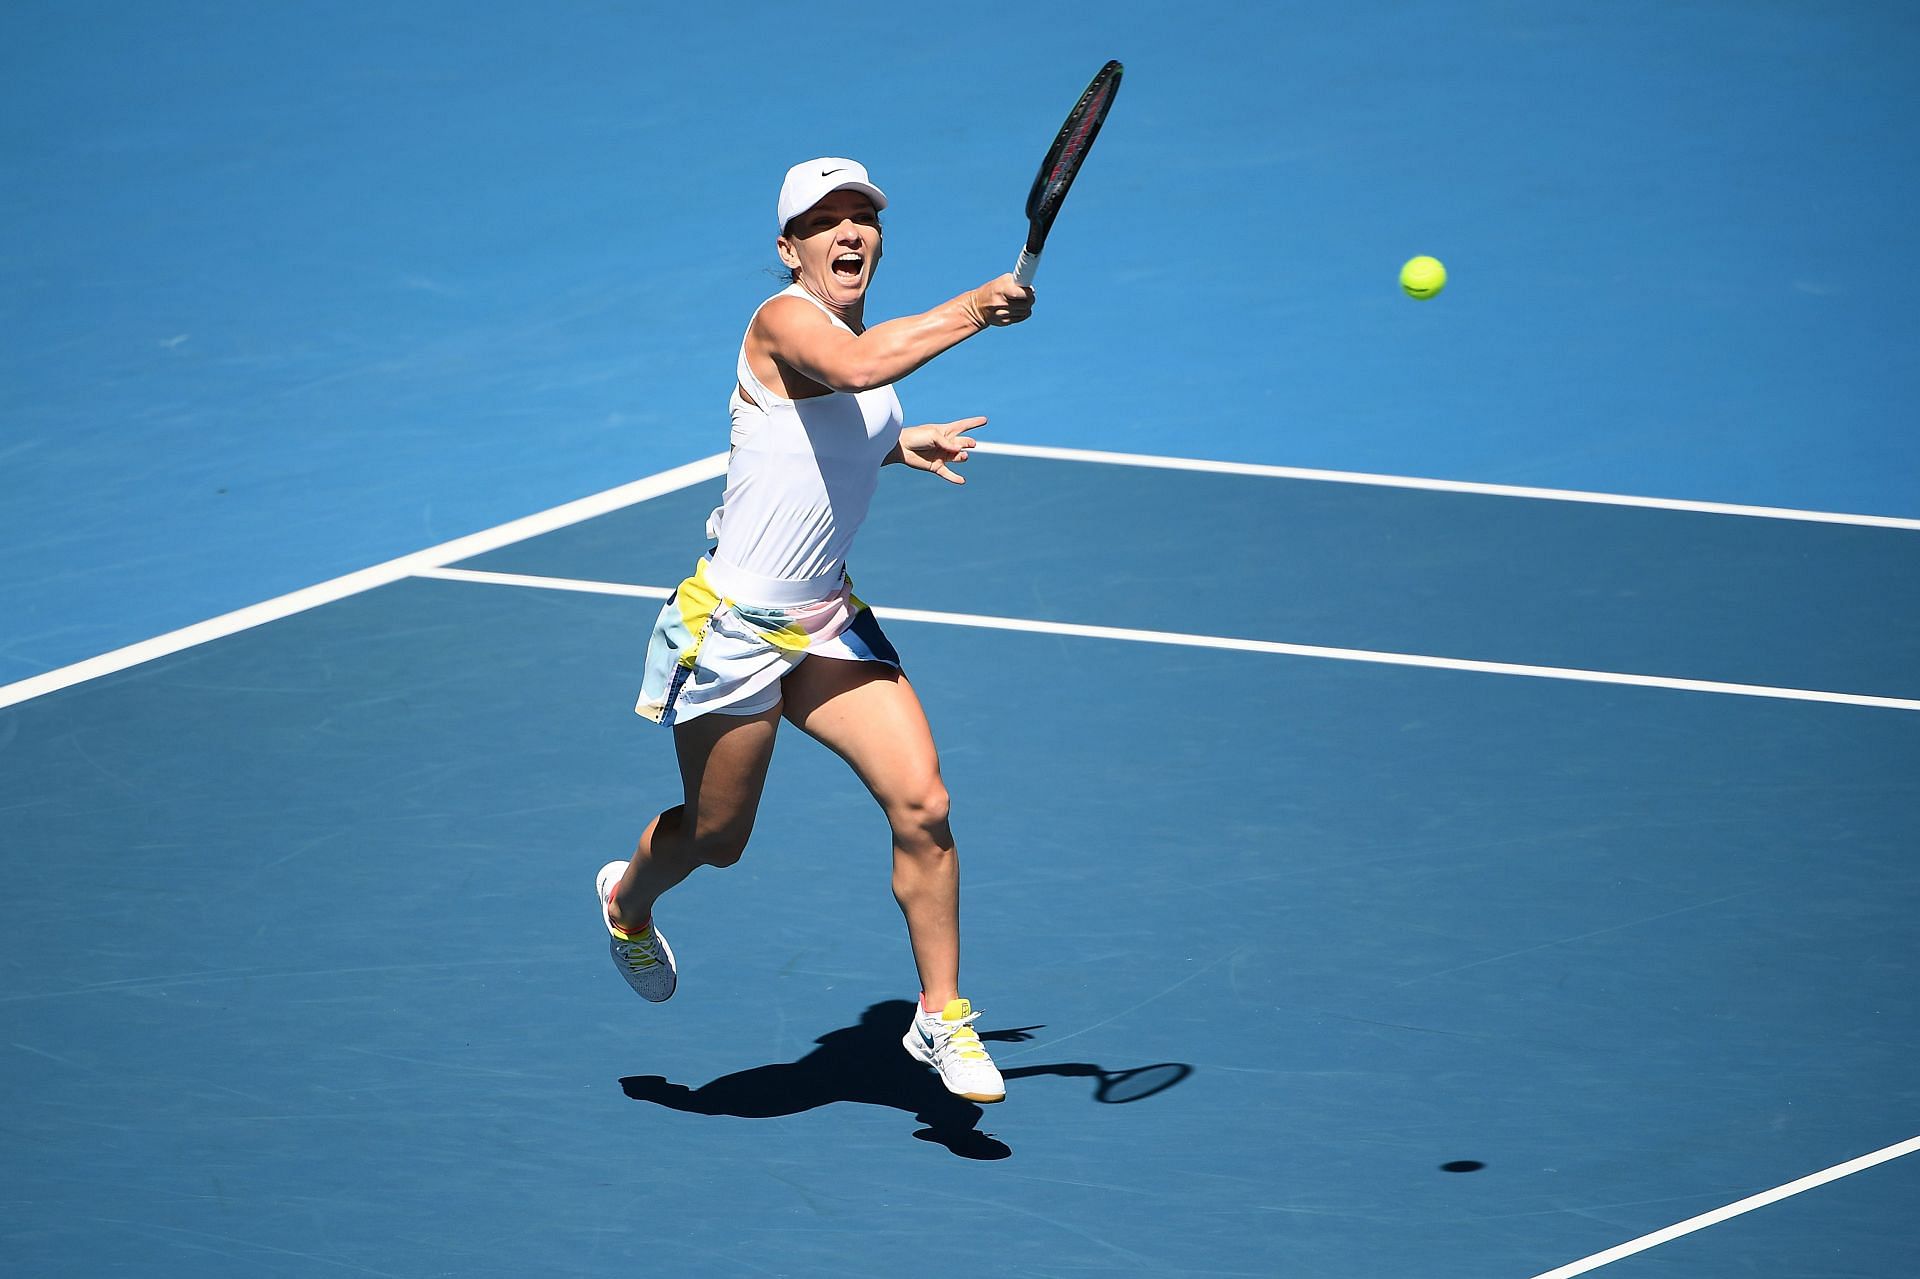 Simona Halep could spring an upset or two.